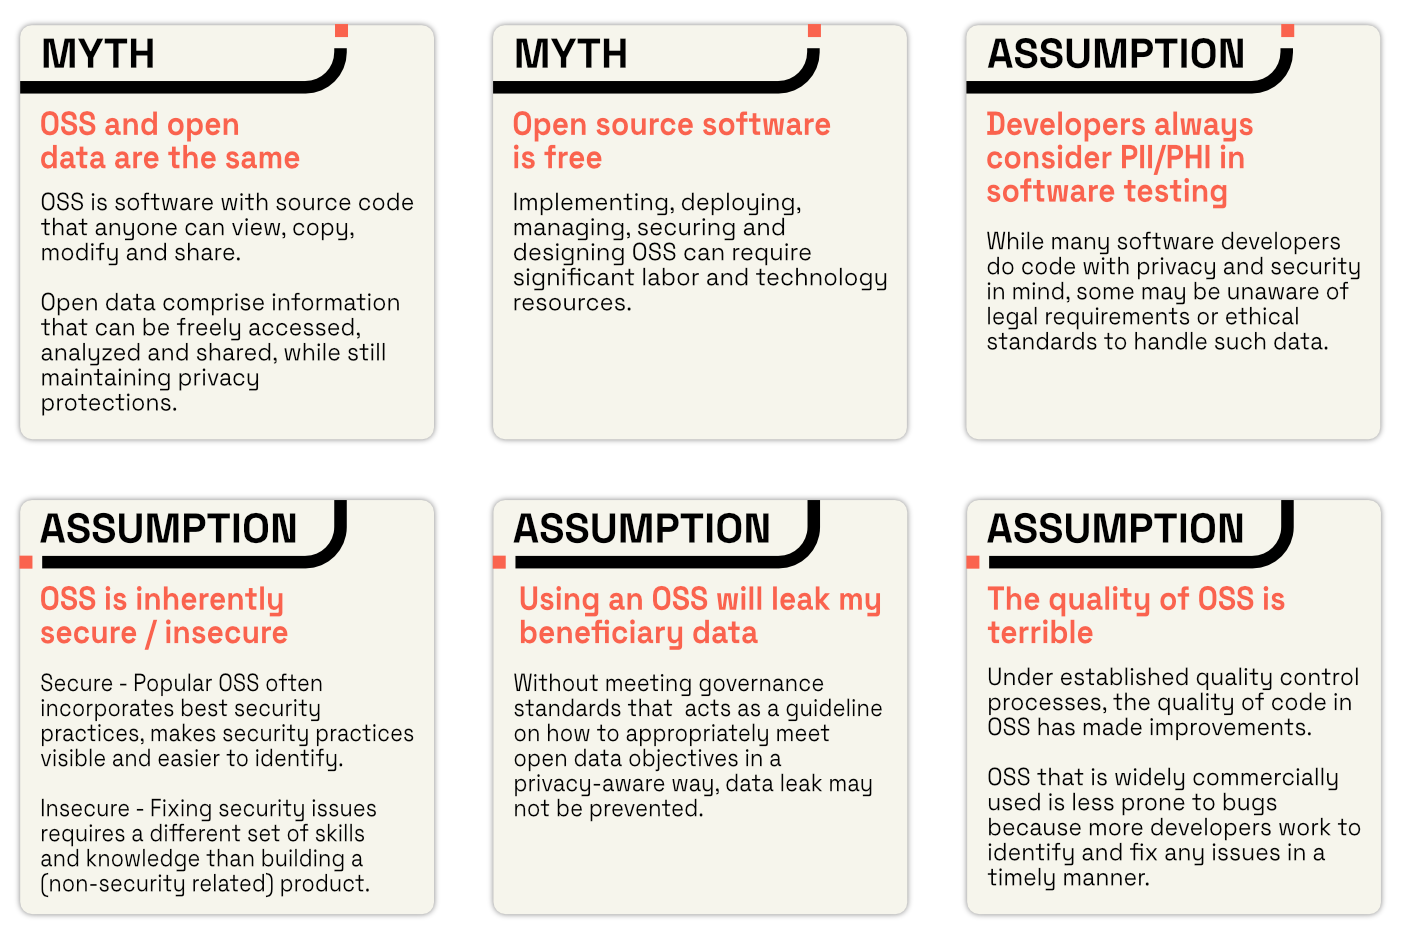 Myth and assumption in OSS